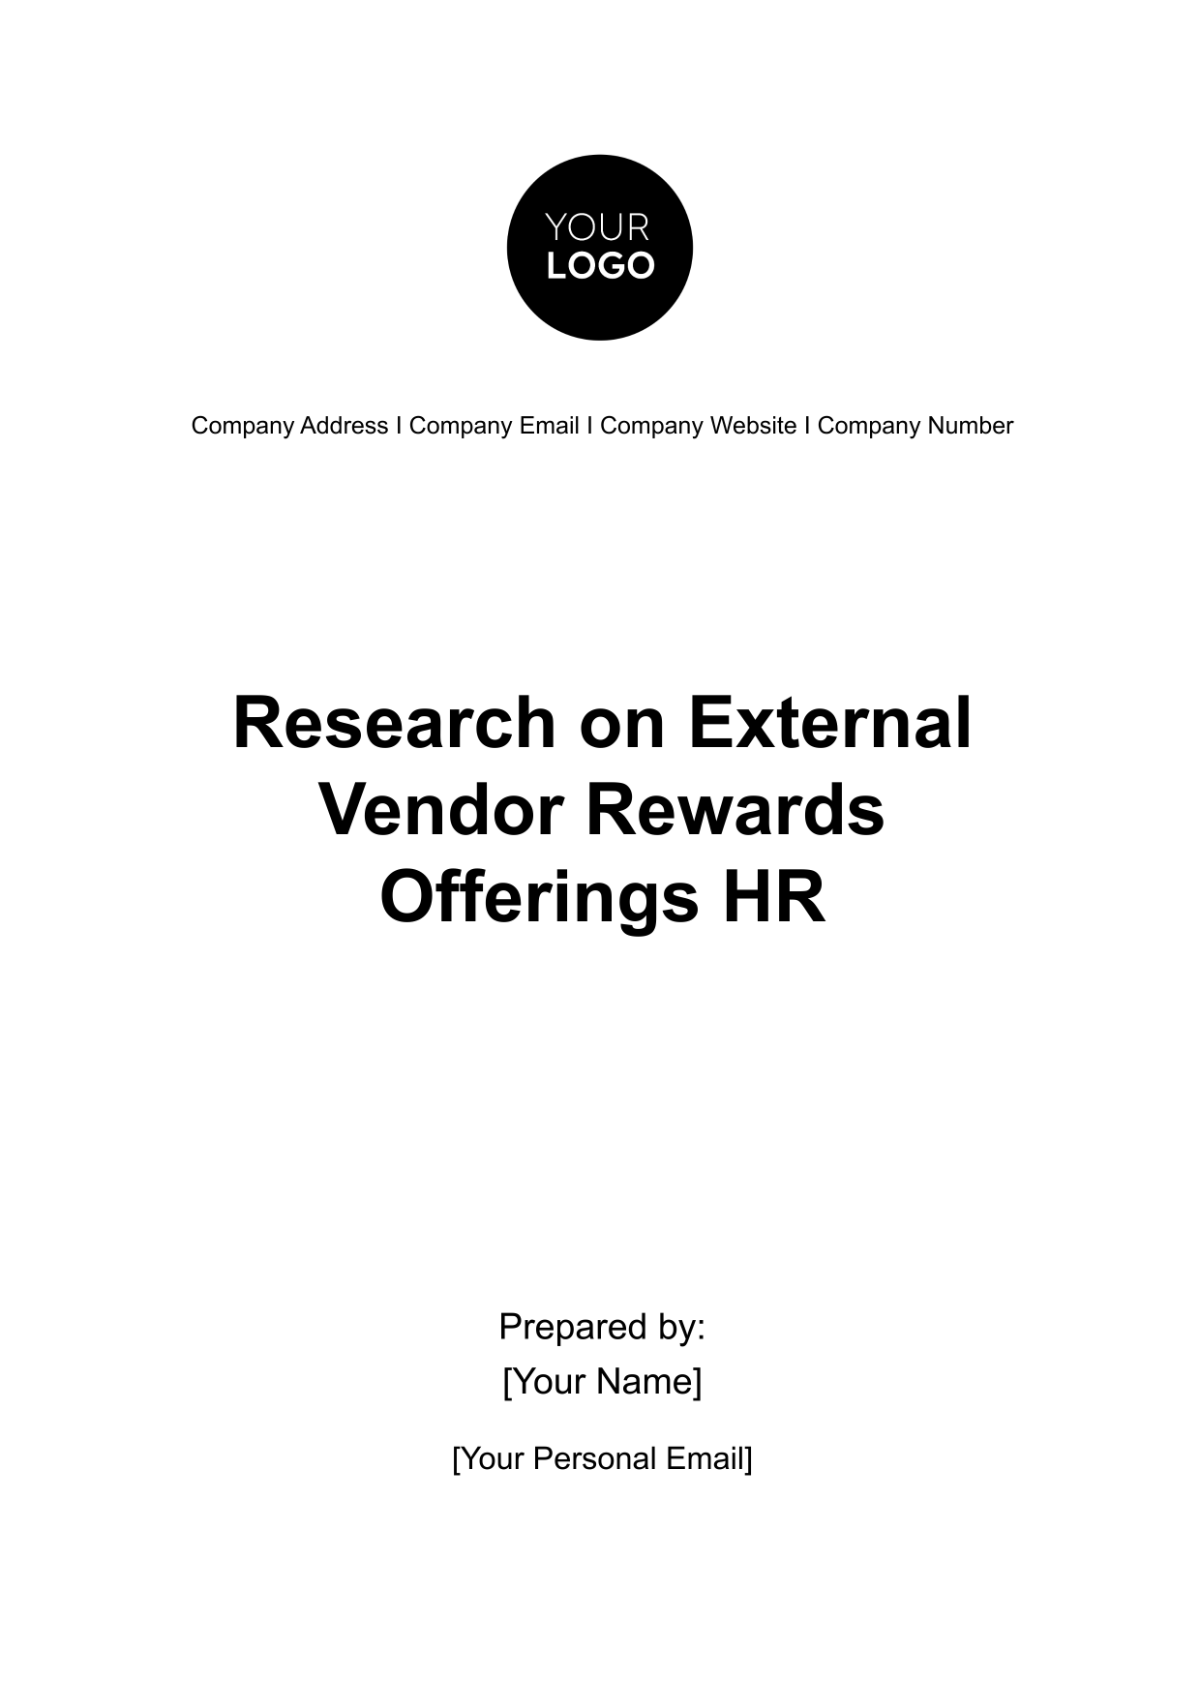 Free Research on External Vendor Rewards Offerings HR Template